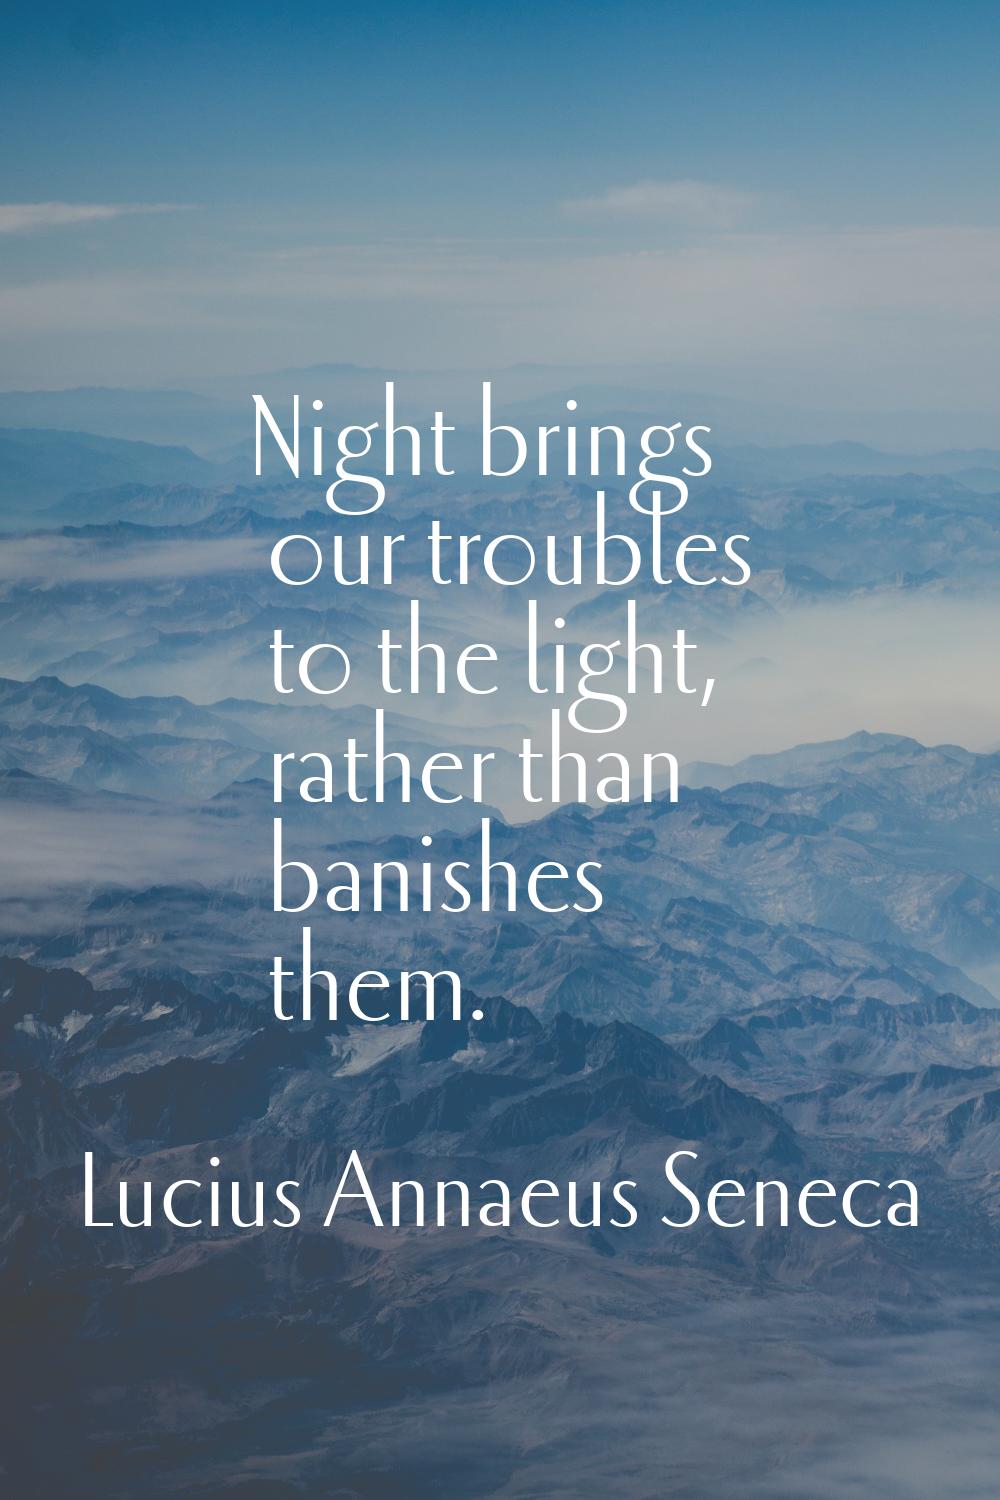 Night brings our troubles to the light, rather than banishes them.